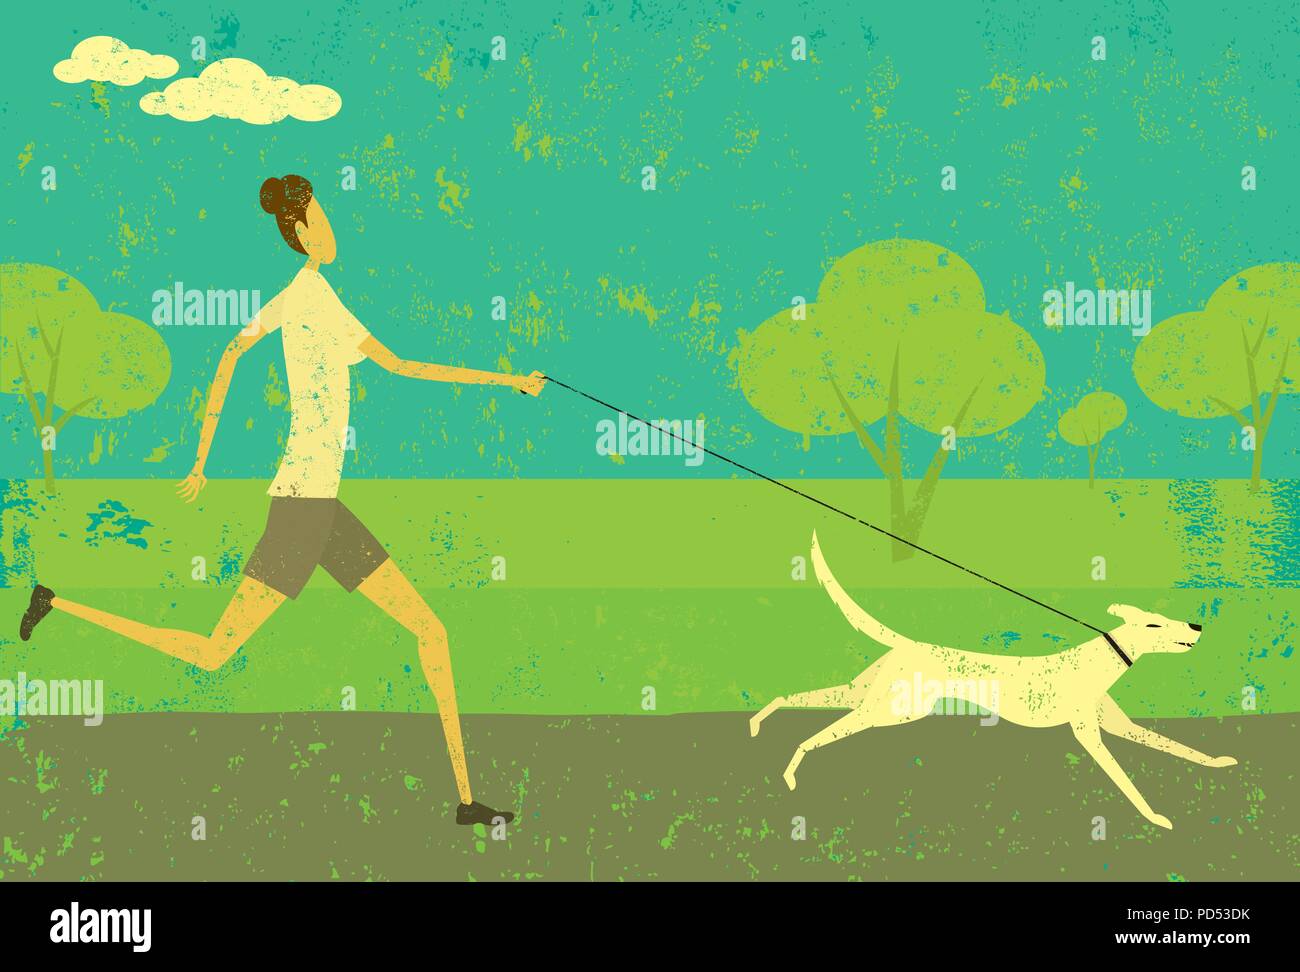 Running with your dog. A woman running with her dog over an abstract park background. Stock Vector